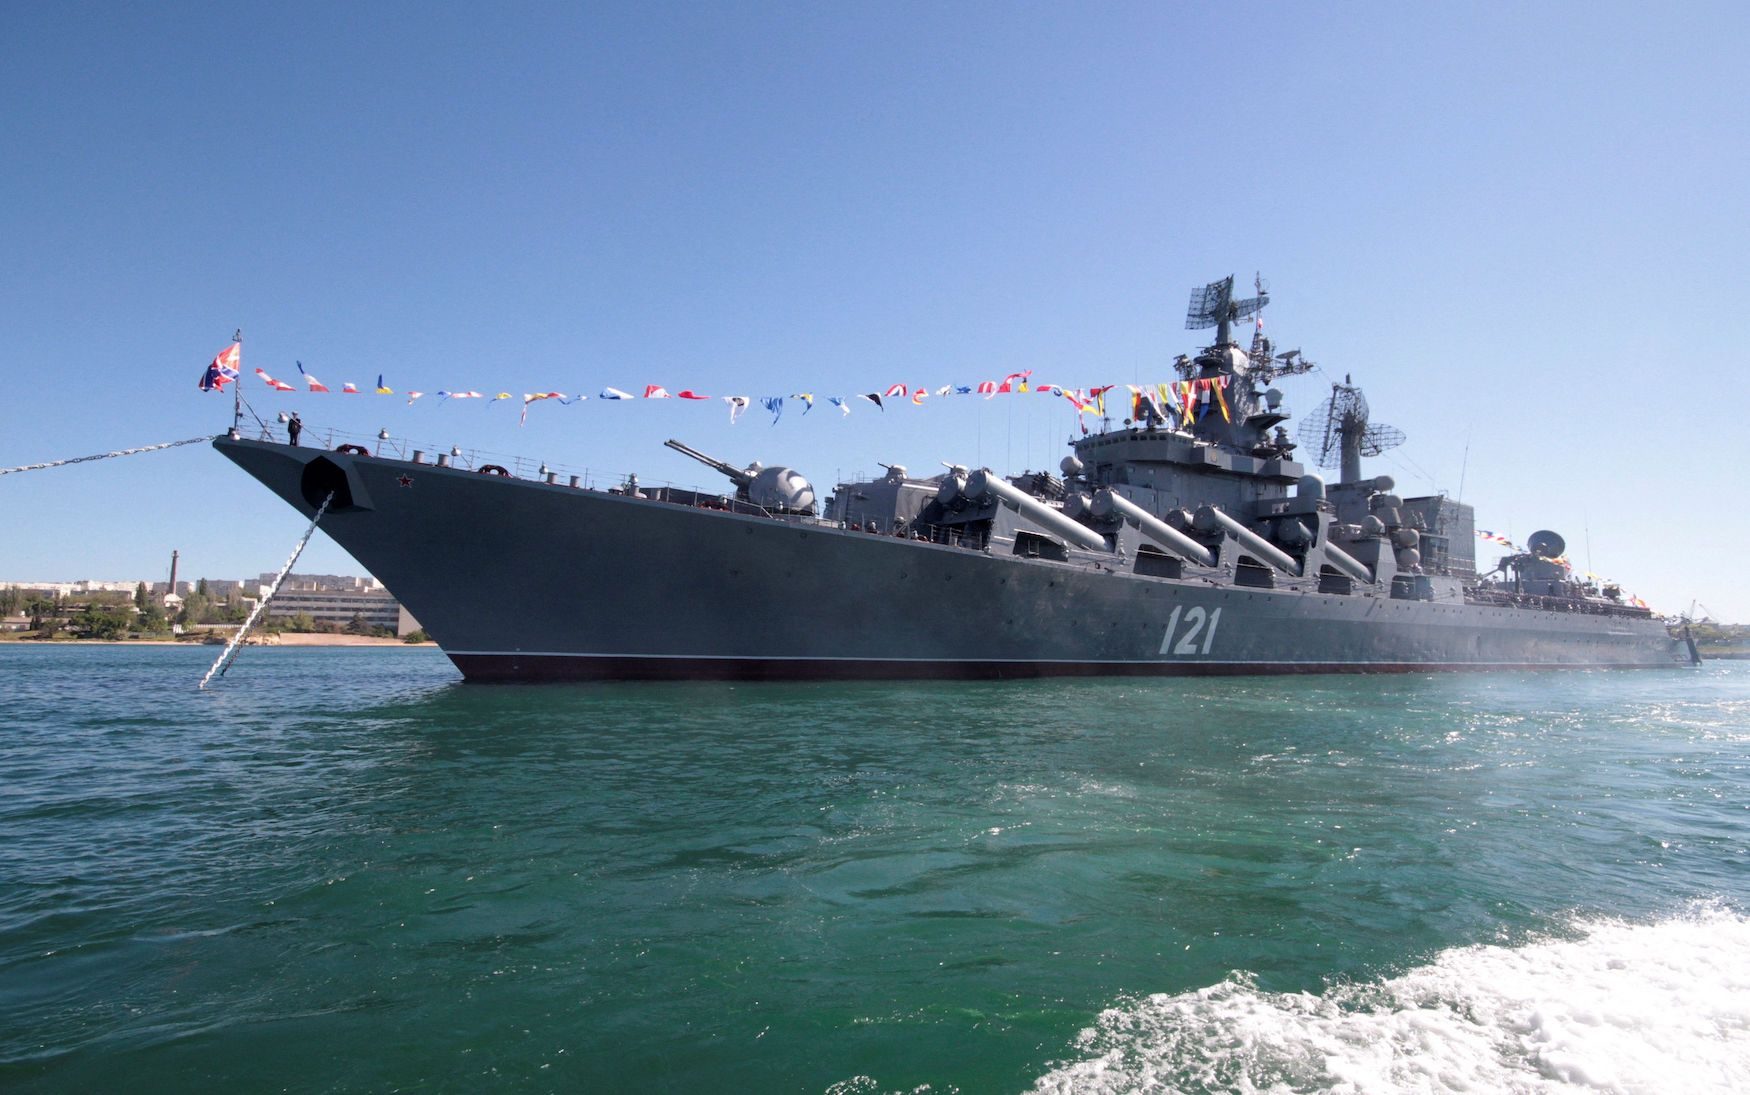 Russia to tow crippled warship back to port after what Ukraine says was a missile hit